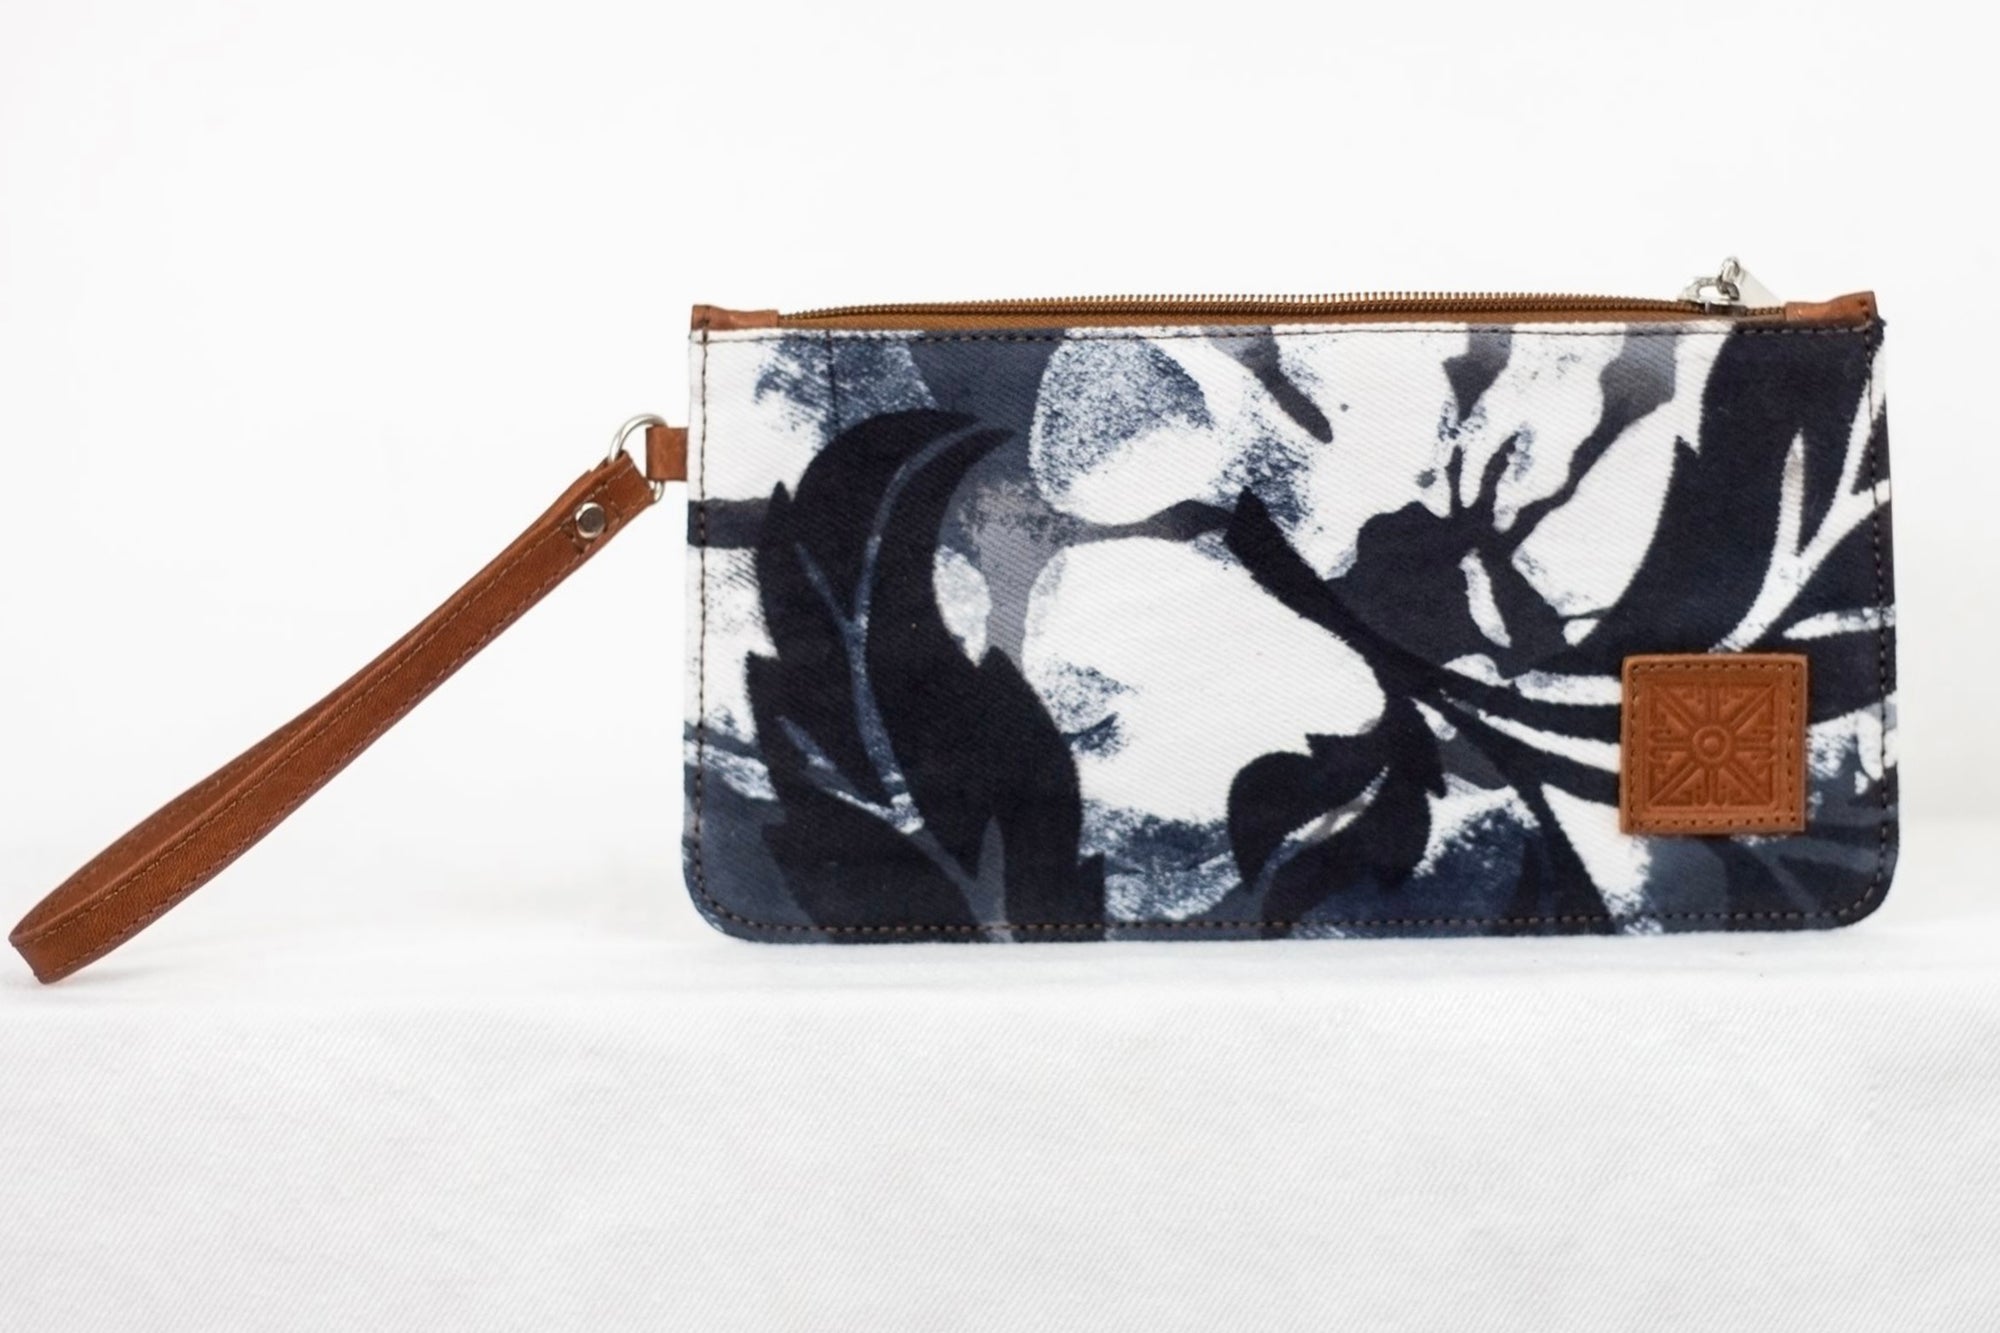     * Hand painted, leather trimmed clutch purse with the black and white “hula nights” pattern. #1